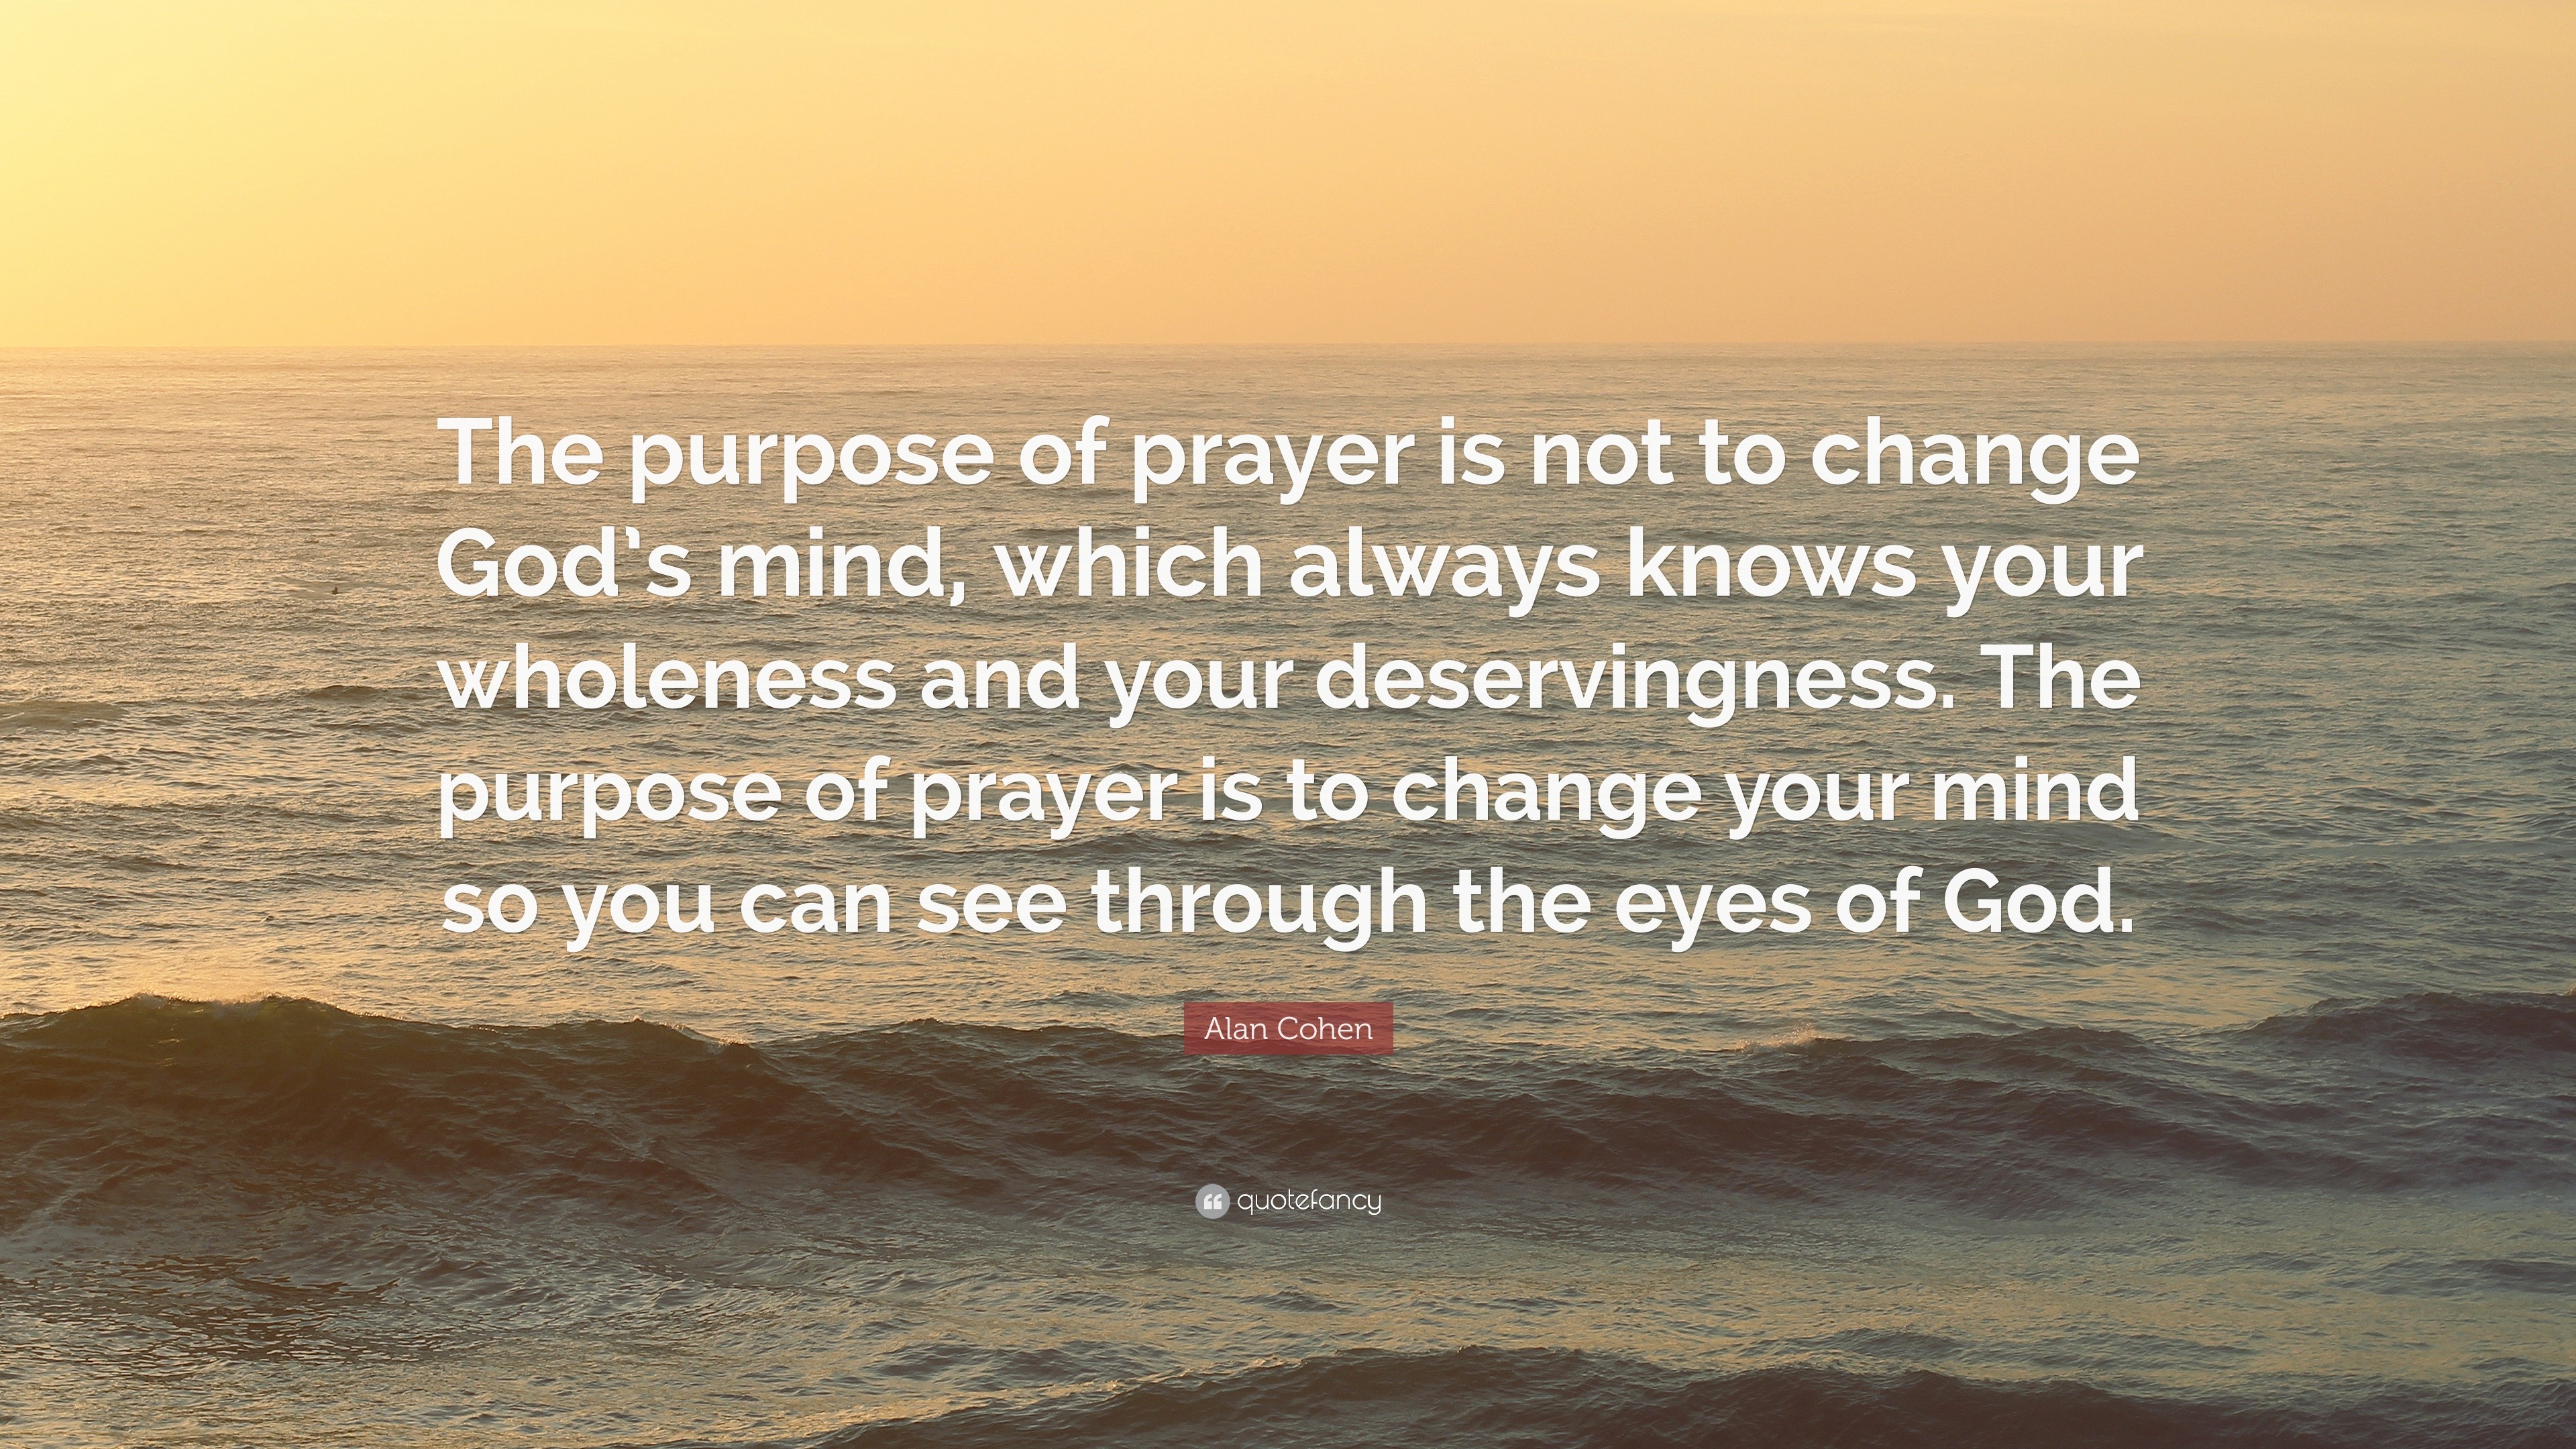 Alan Cohen Quote: “The purpose of prayer is not to change God’s mind ...